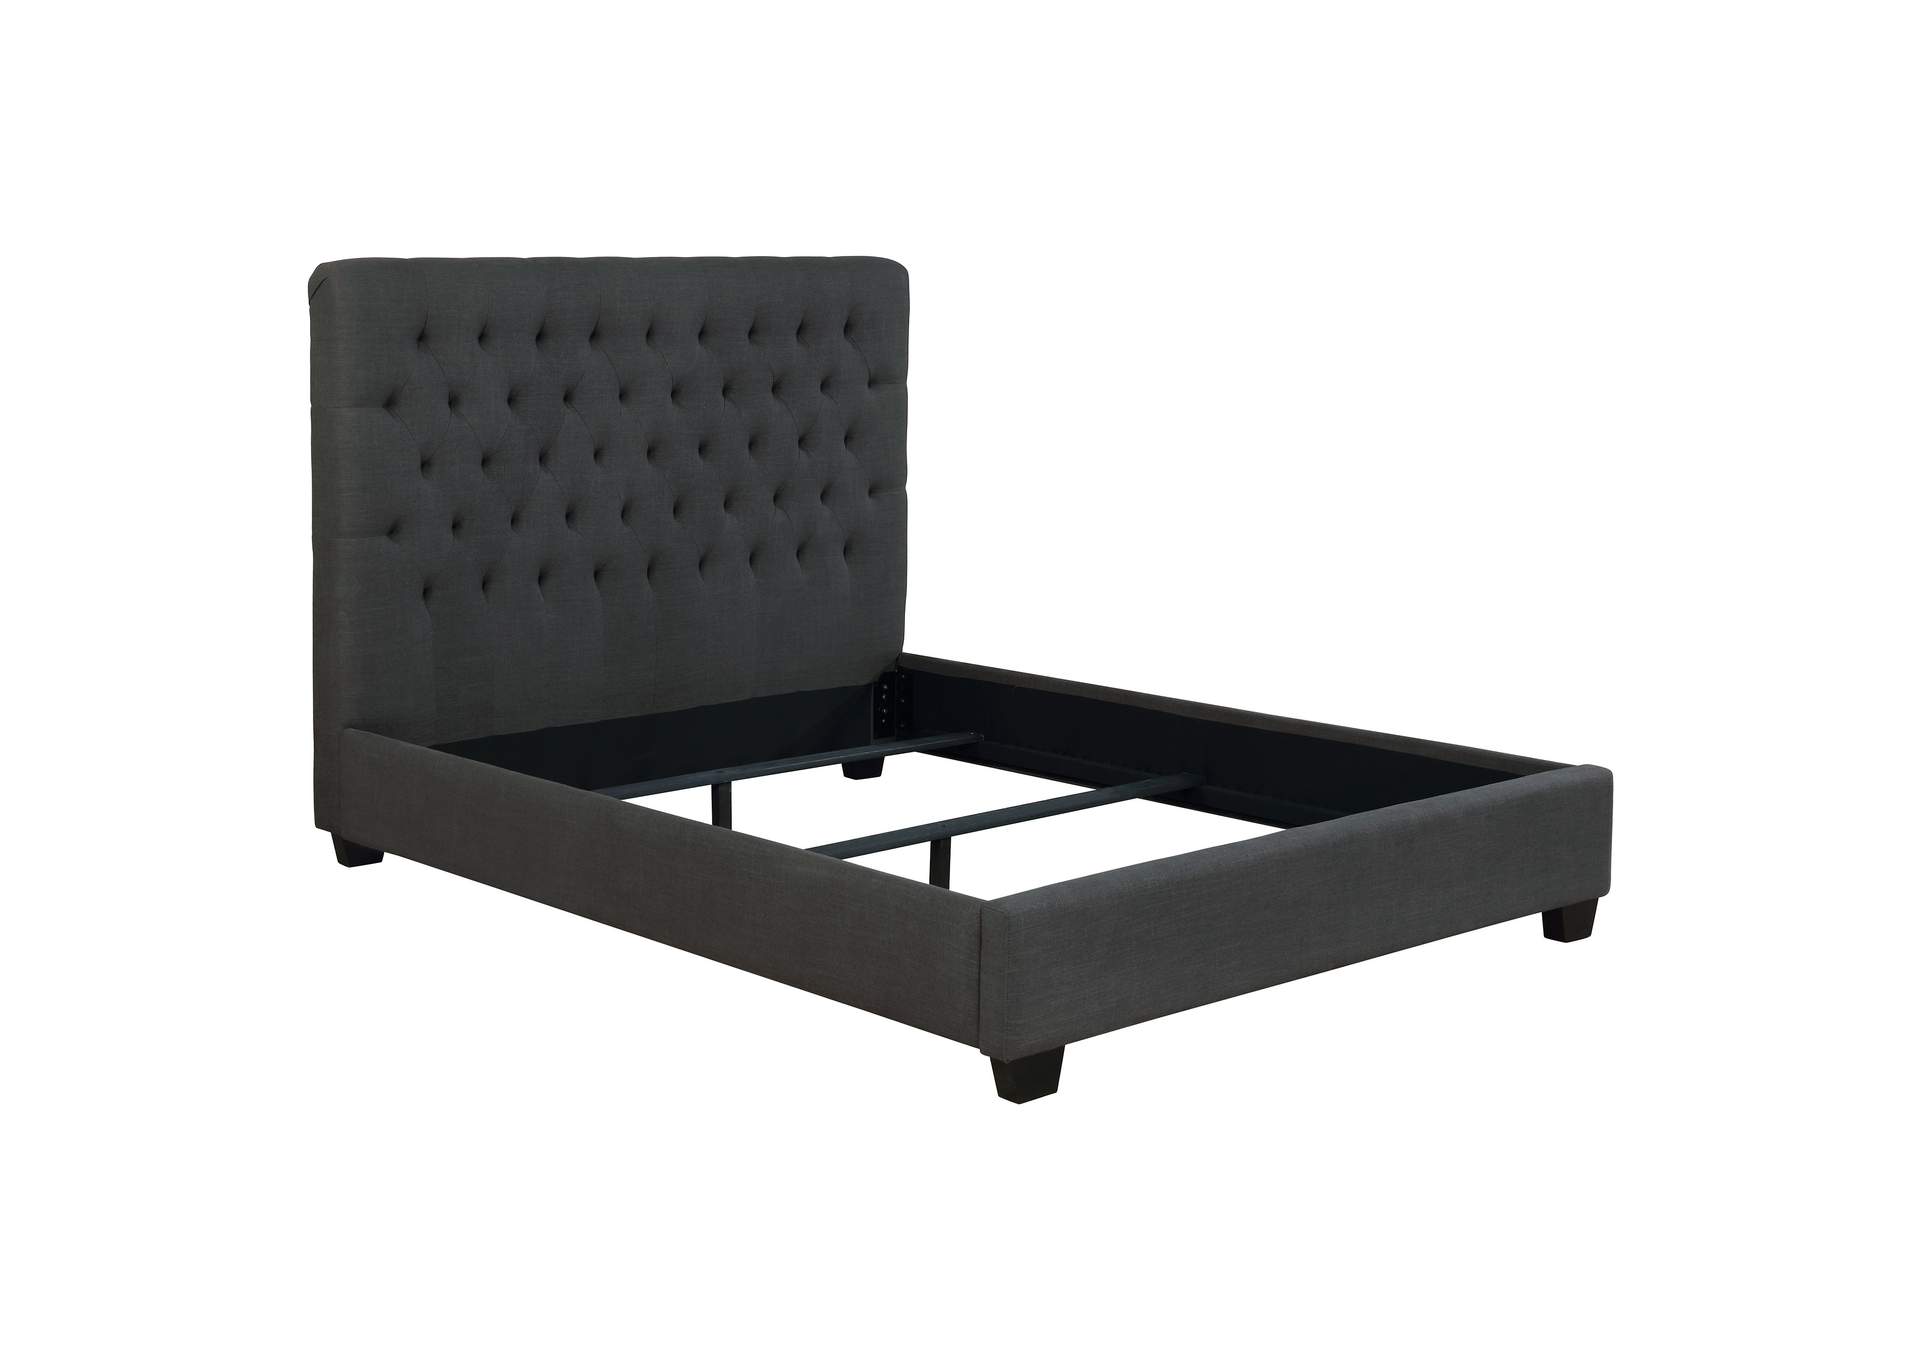 Chloe Tufted Upholstered Full Bed Charcoal,Coaster Furniture